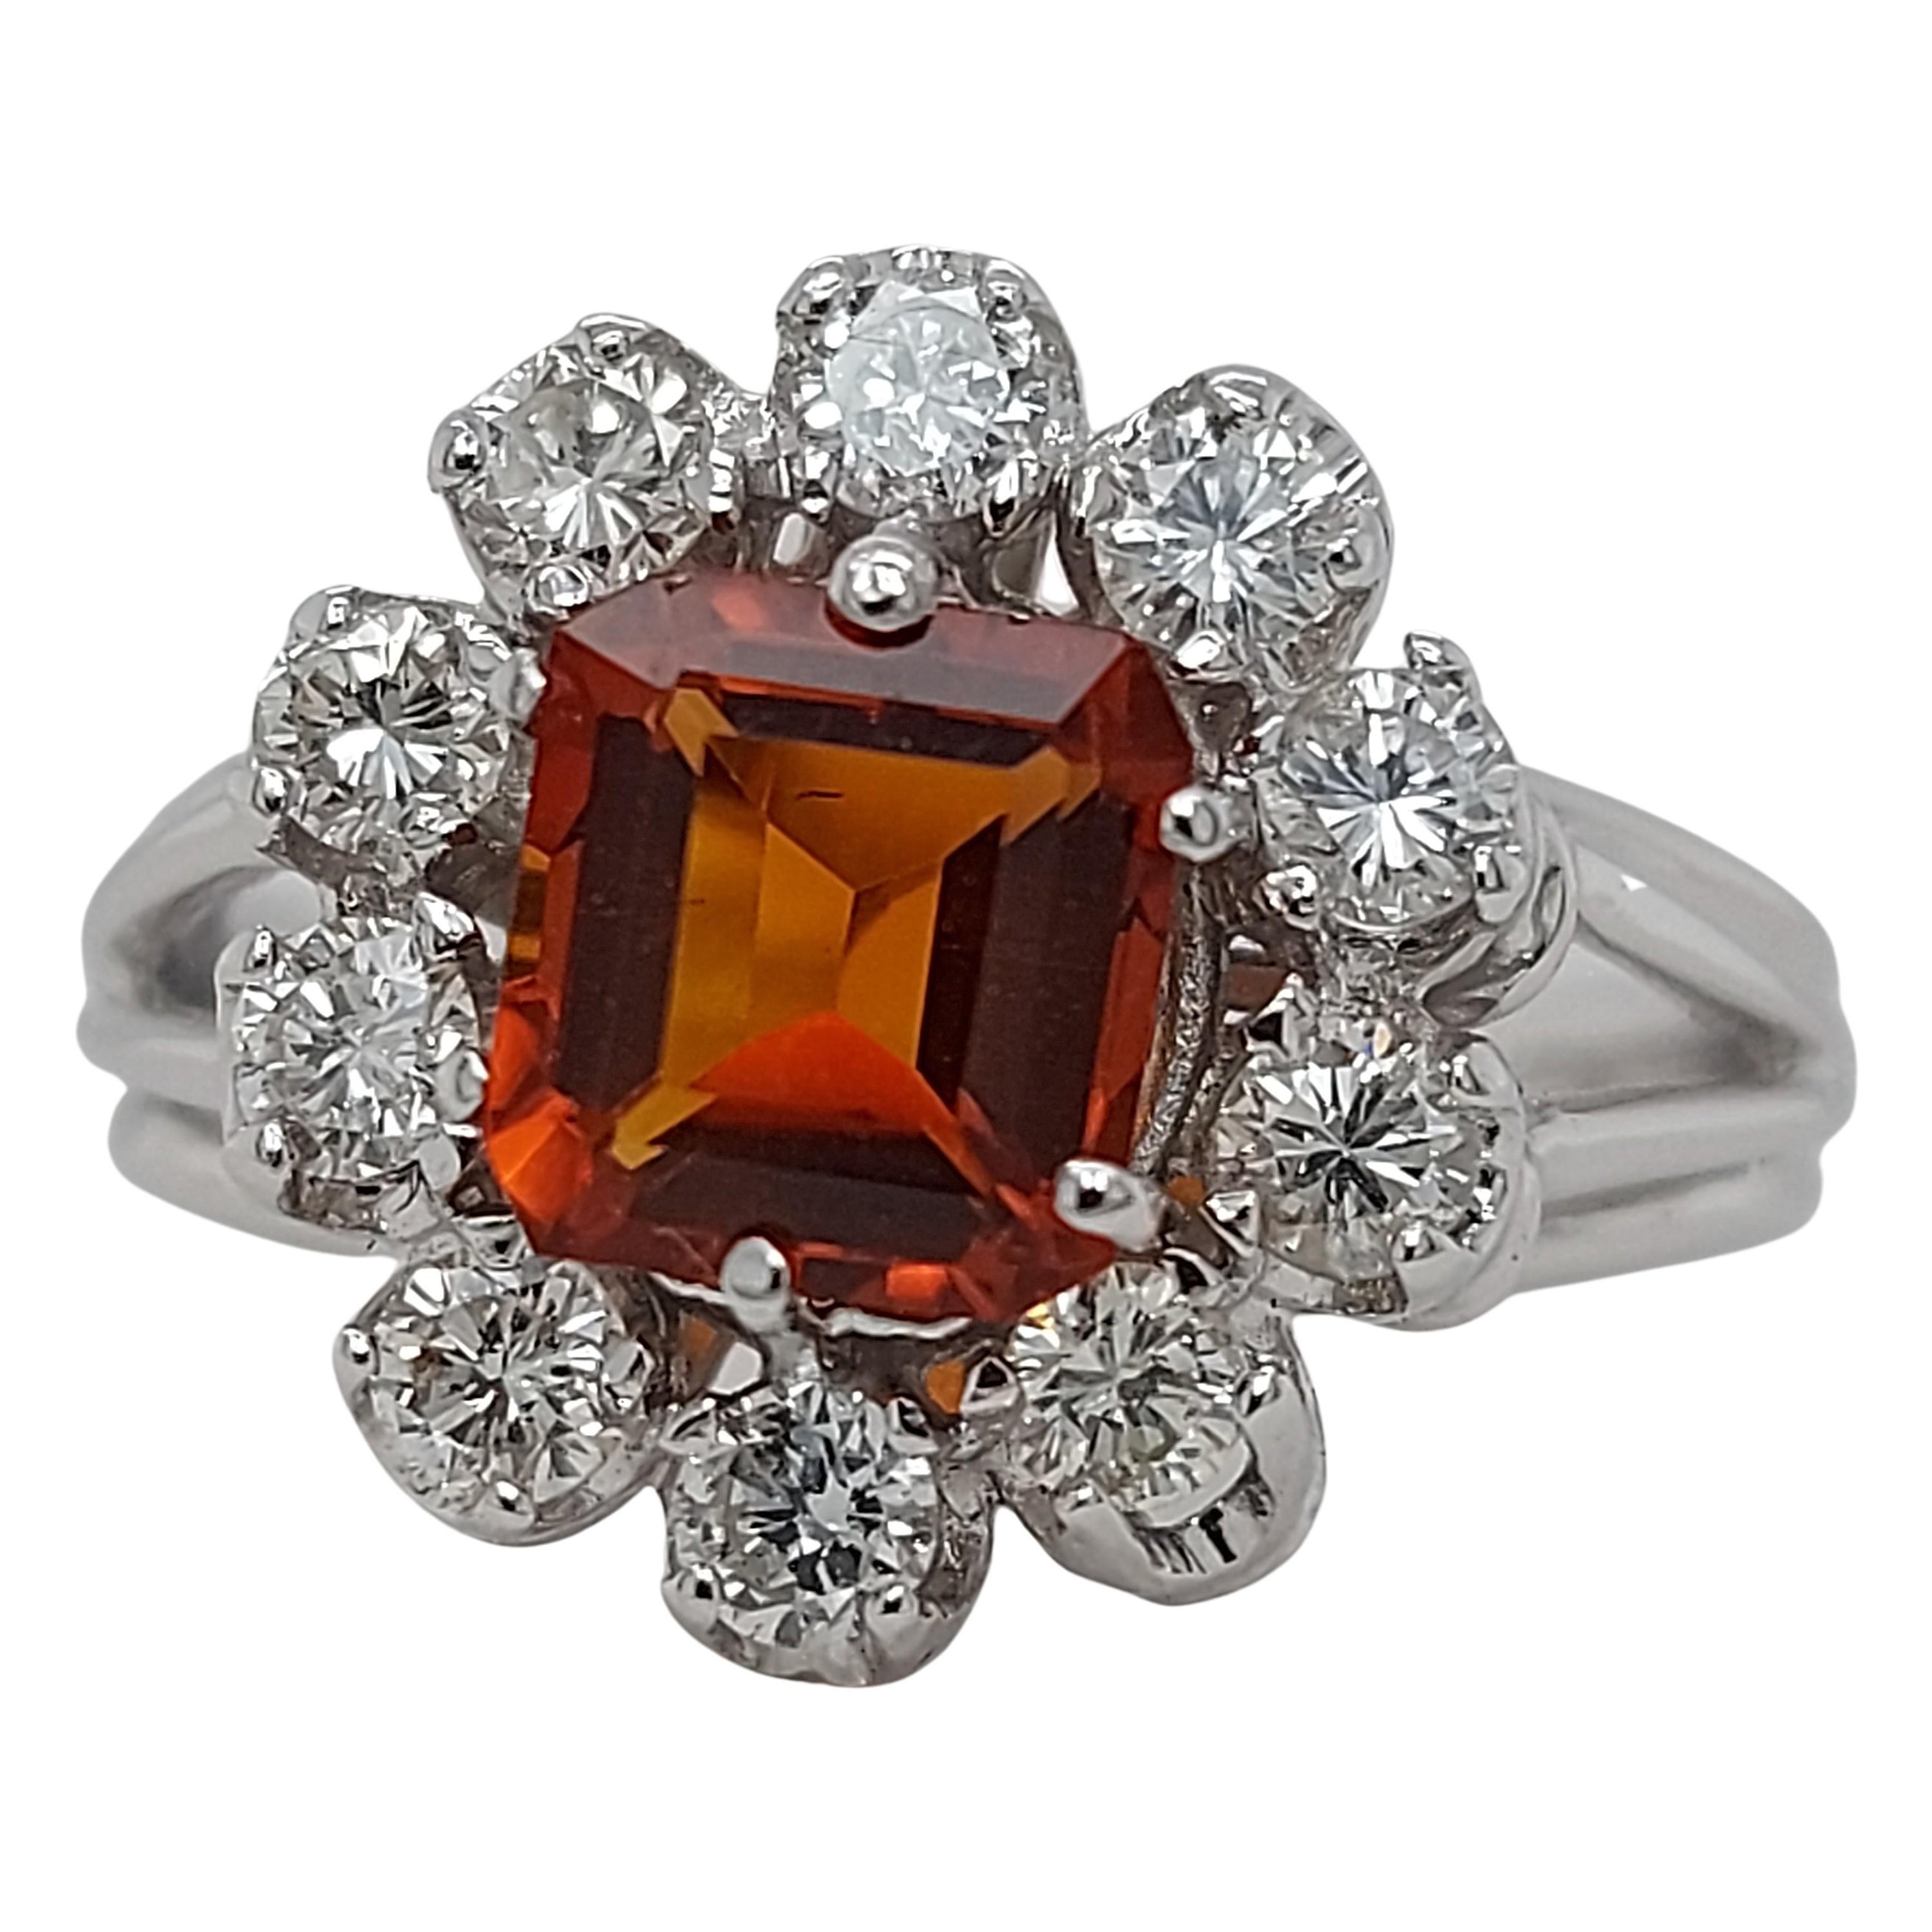 Stunning Ring with a Big Citrine Stone Surrounded by Diamonds For Sale